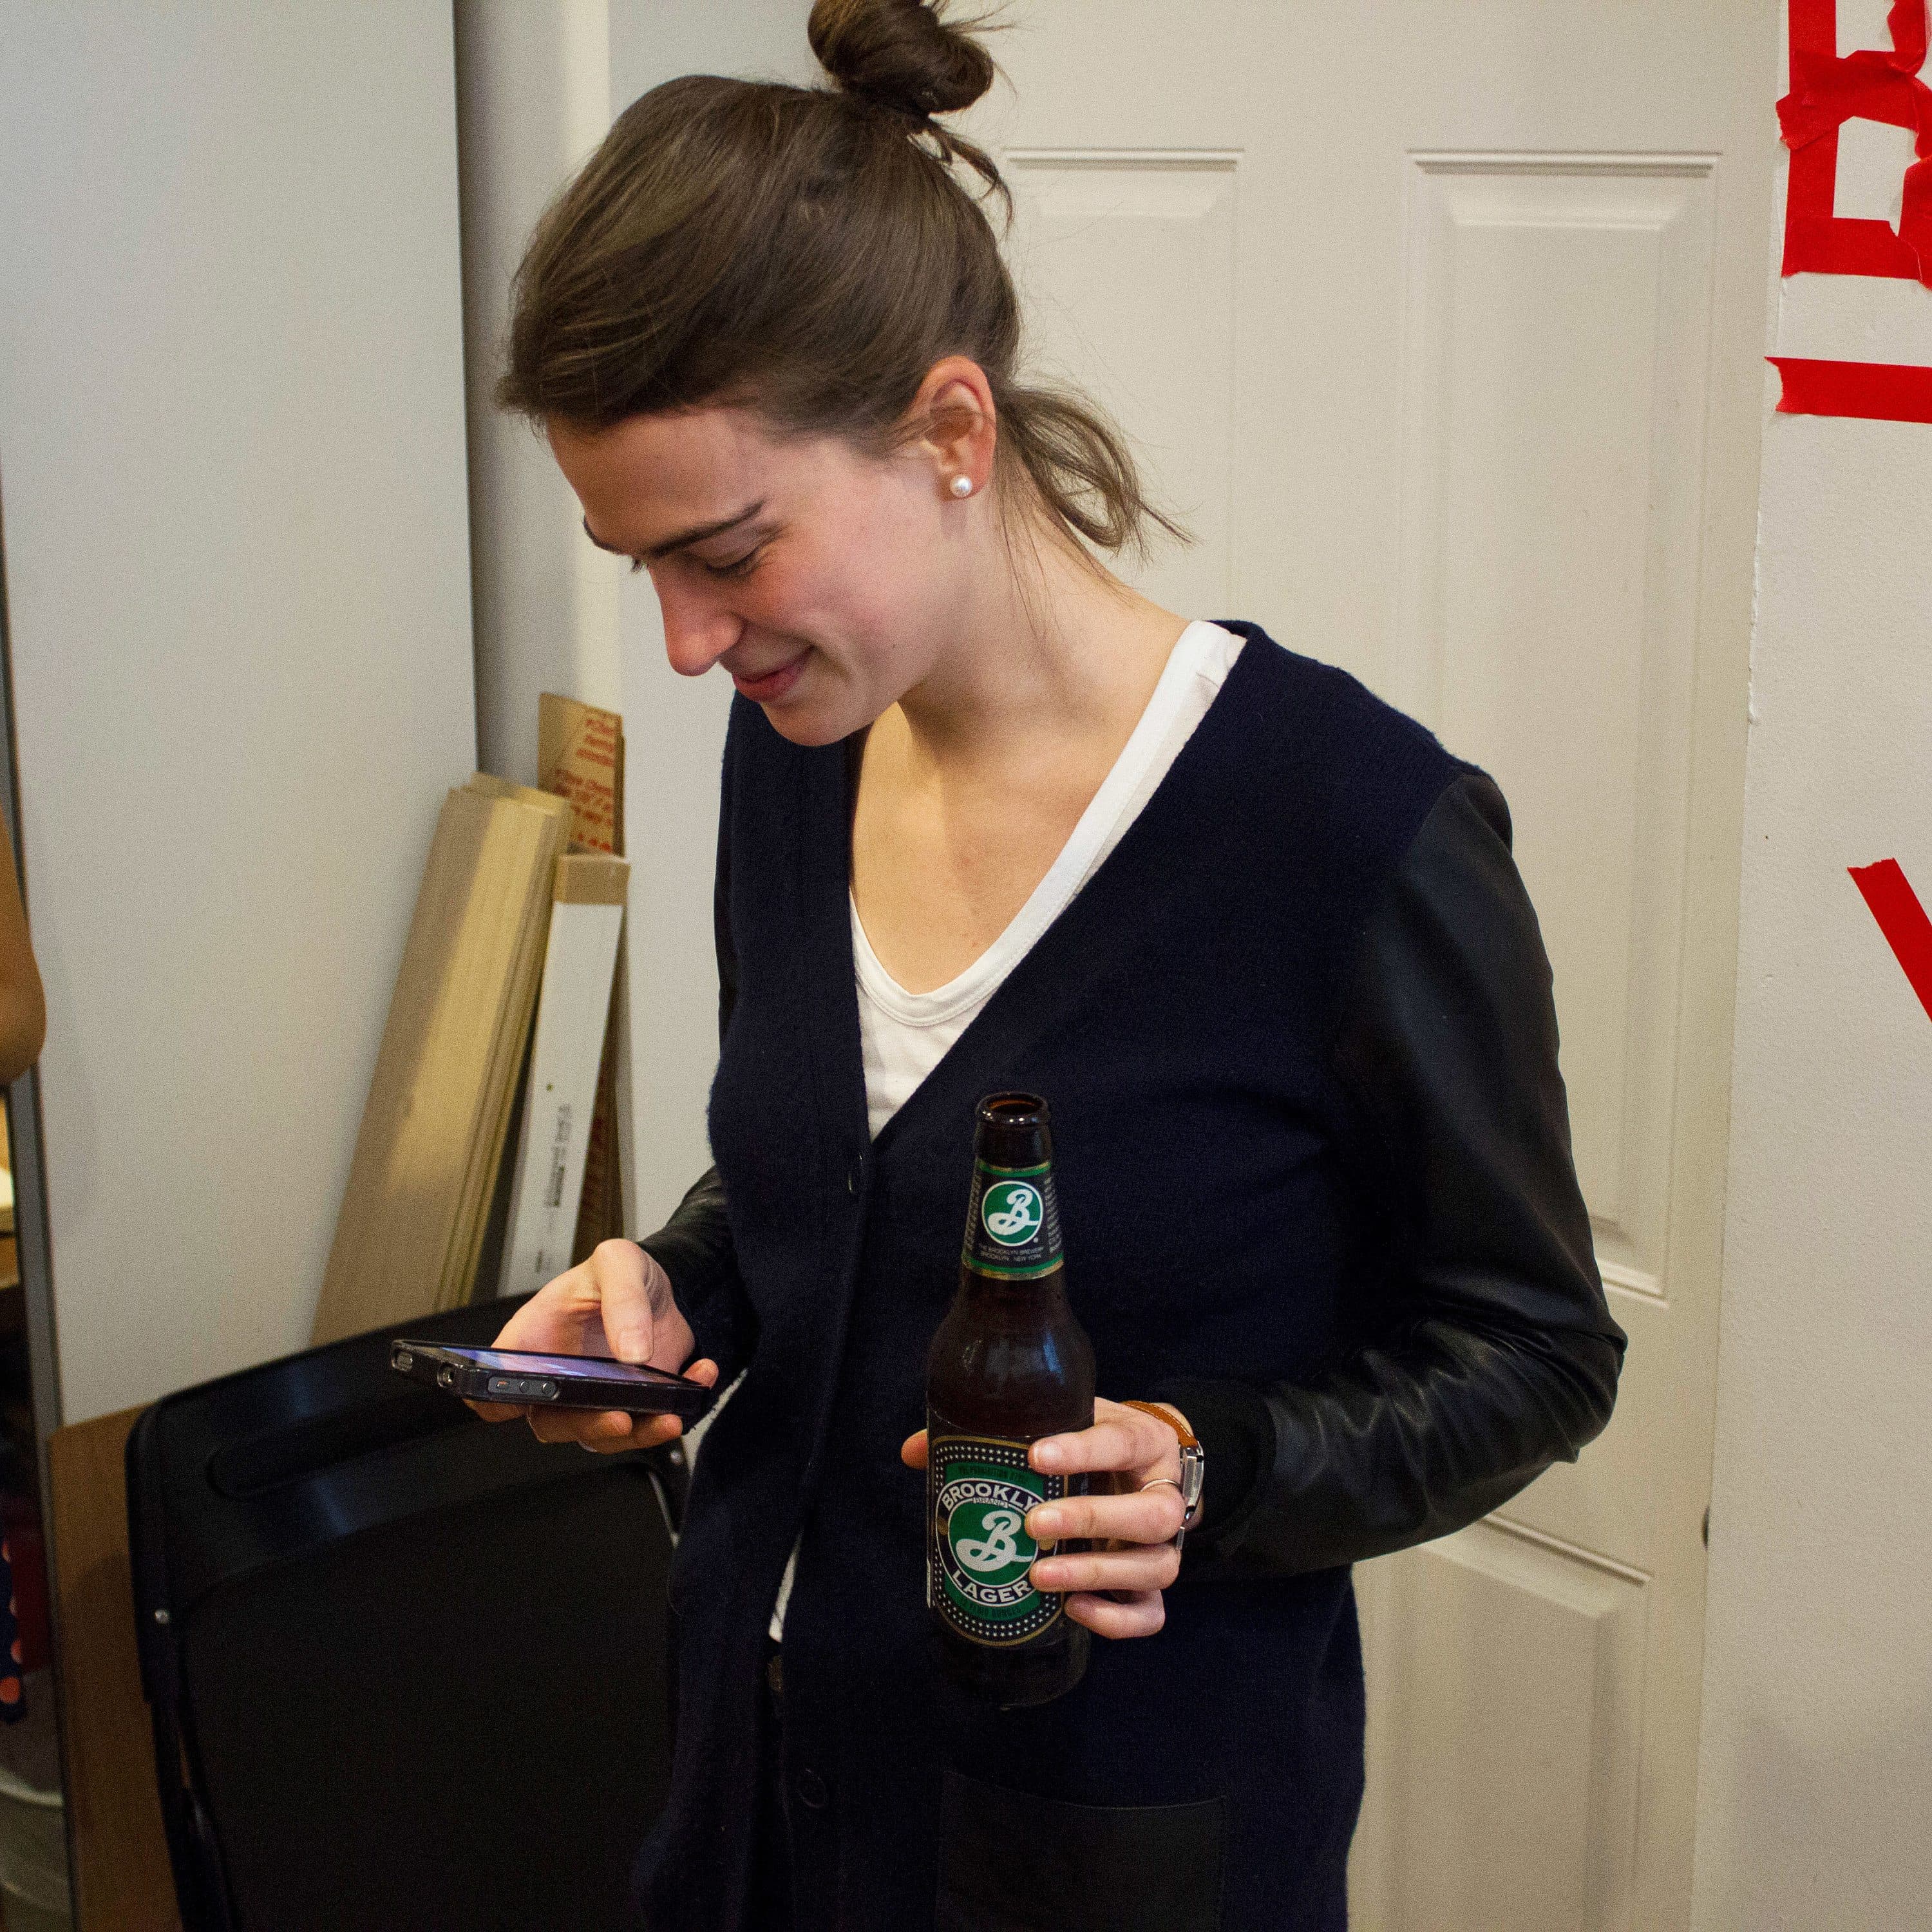 A woman with a bun hairstyle is holding a beer bottle in one hand and looking at her phone. She is wearing a cardigan. Another person in a white top and scarf is standing nearby, holding a plate with food. A wall with the word "BEER" and an arrow are visible.